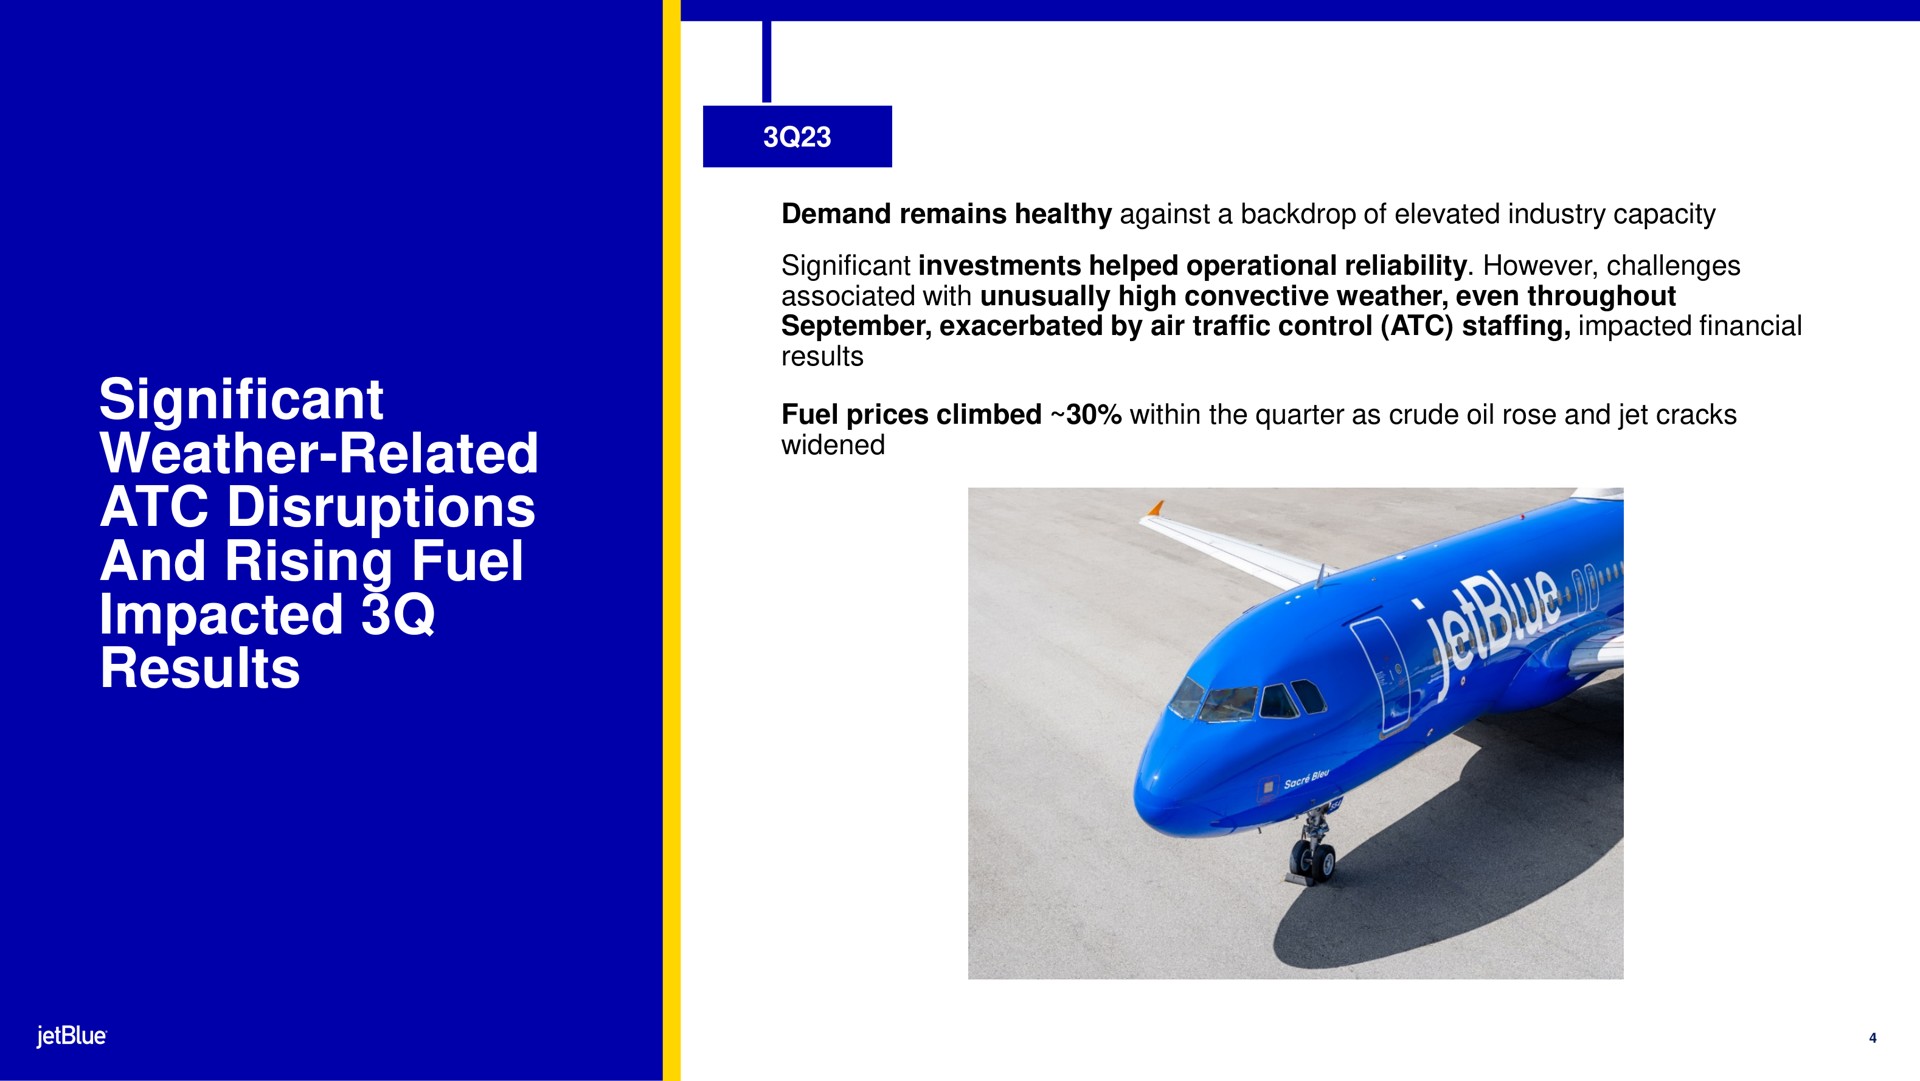 significant weather related disruptions and rising fuel impacted results widened | jetBlue